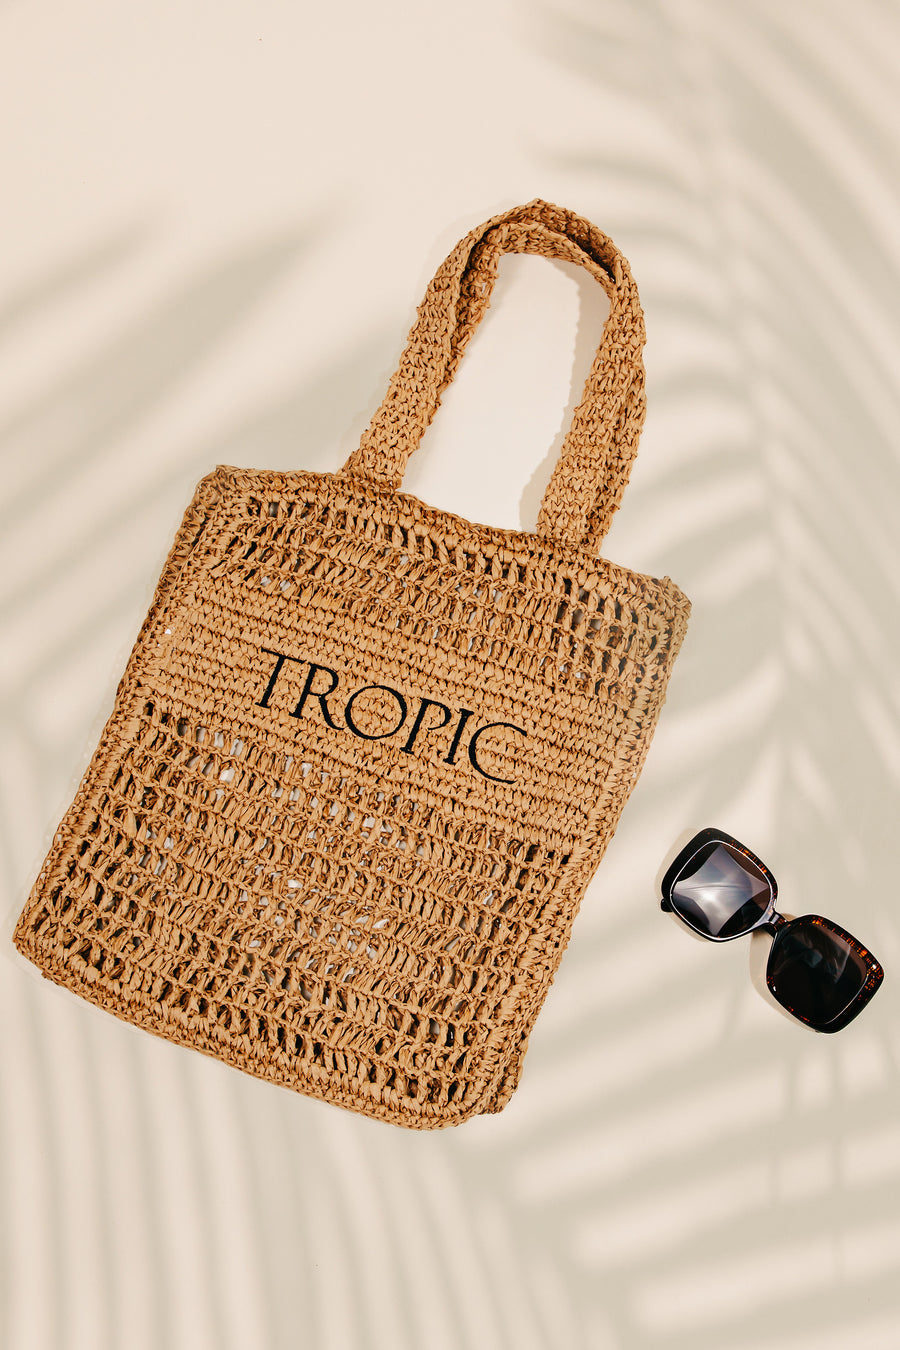 Featuring a woven shoulder bag in the color khaki with the word TROPIC printed on it 